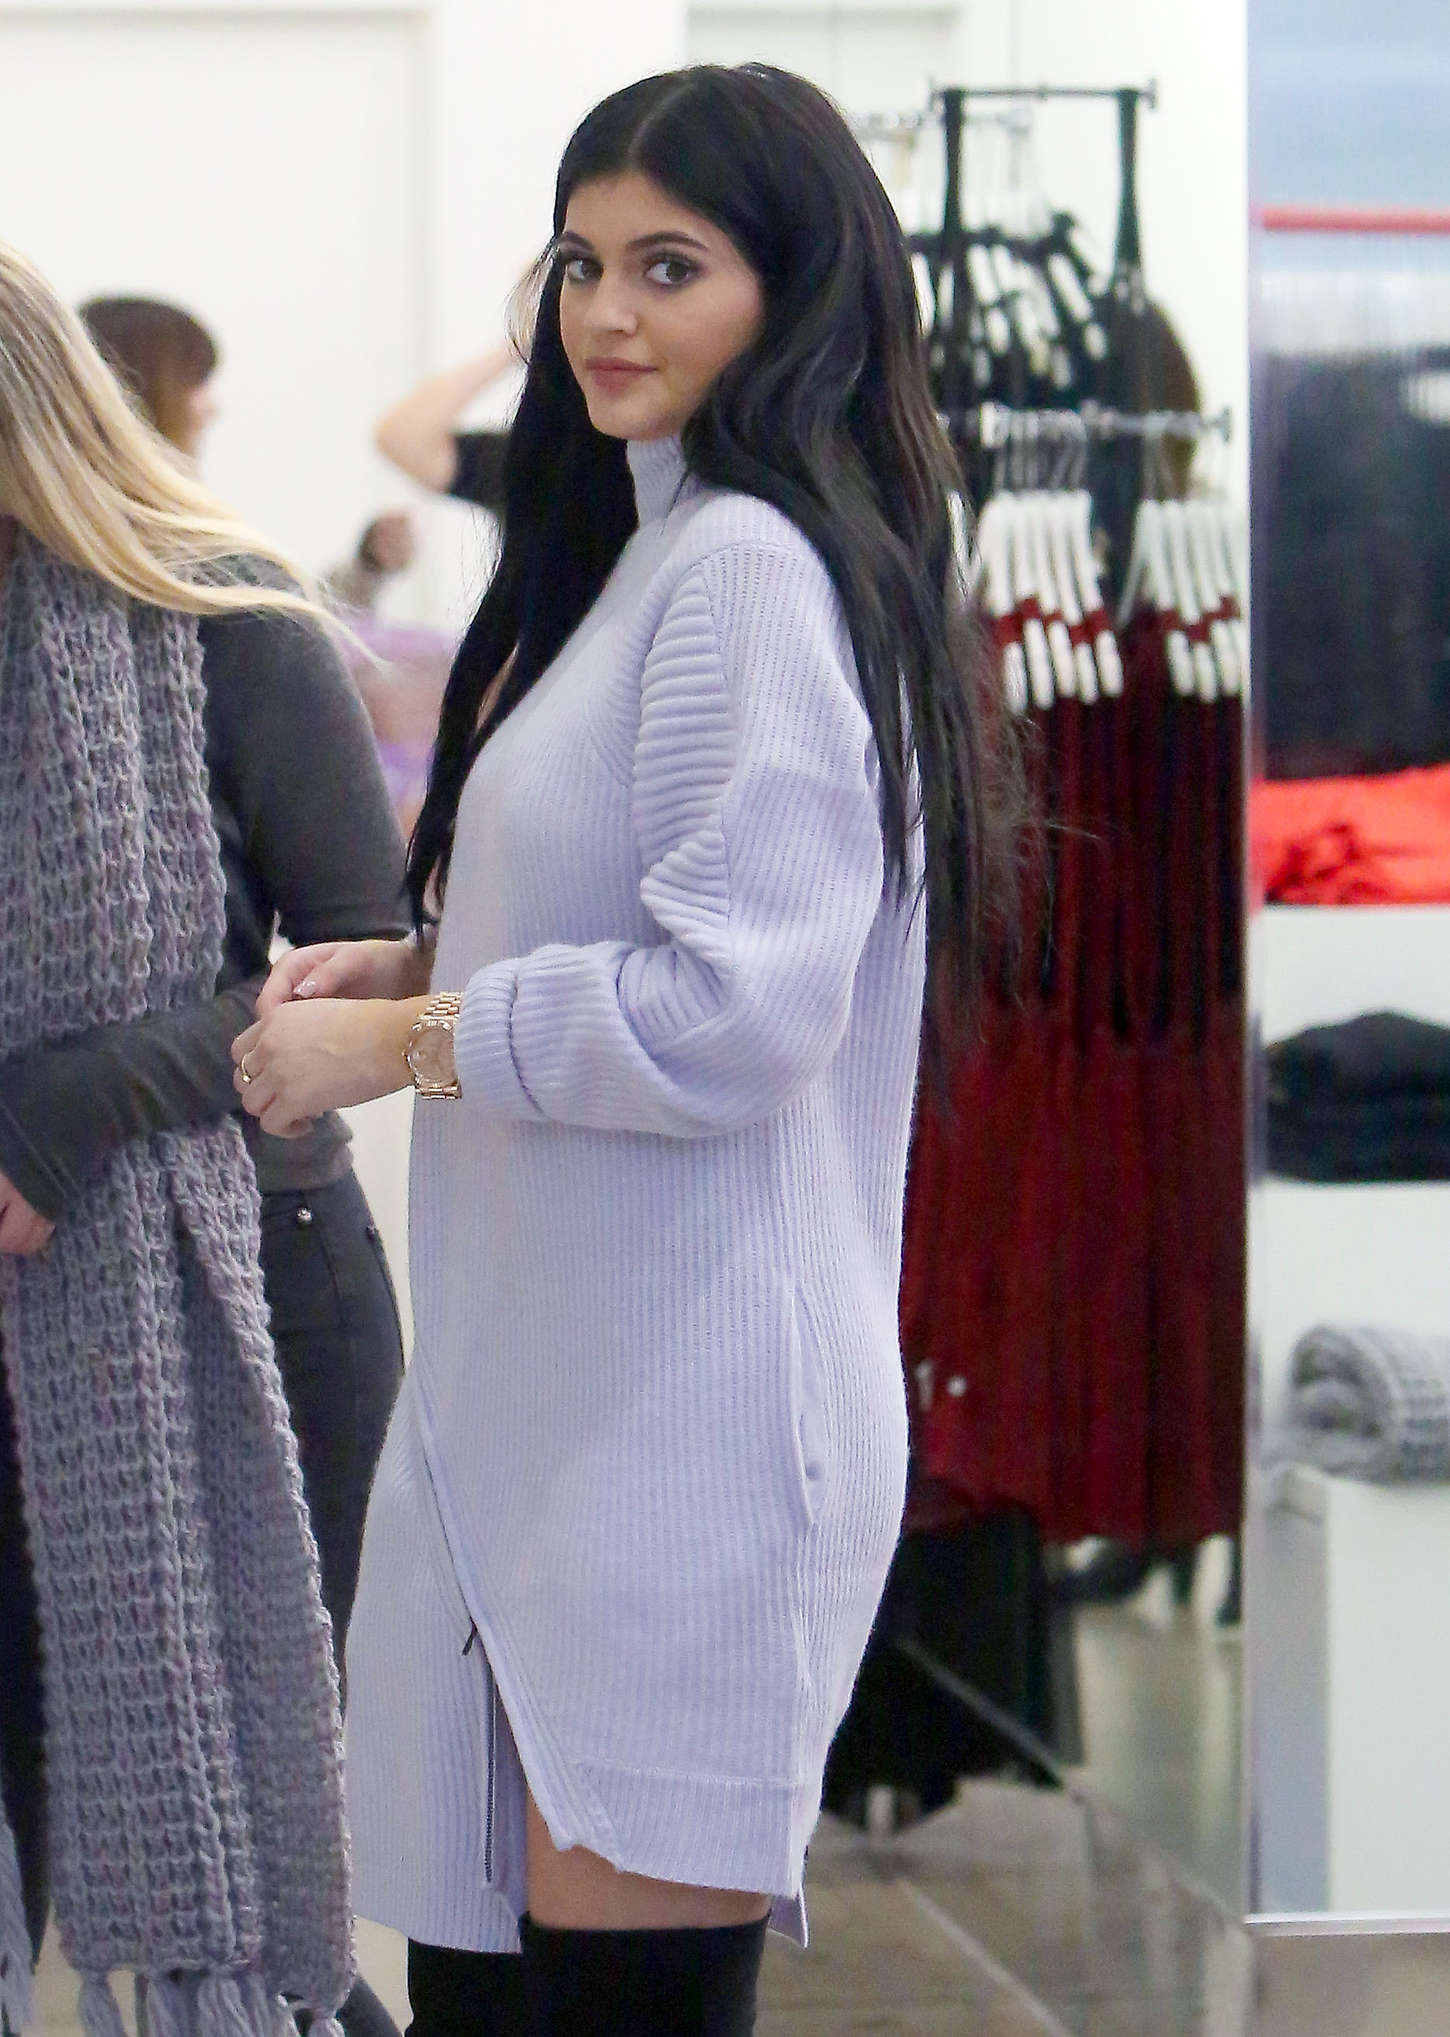 Kylie Jenner: Shopping at Nasty Gals -16 | GotCeleb